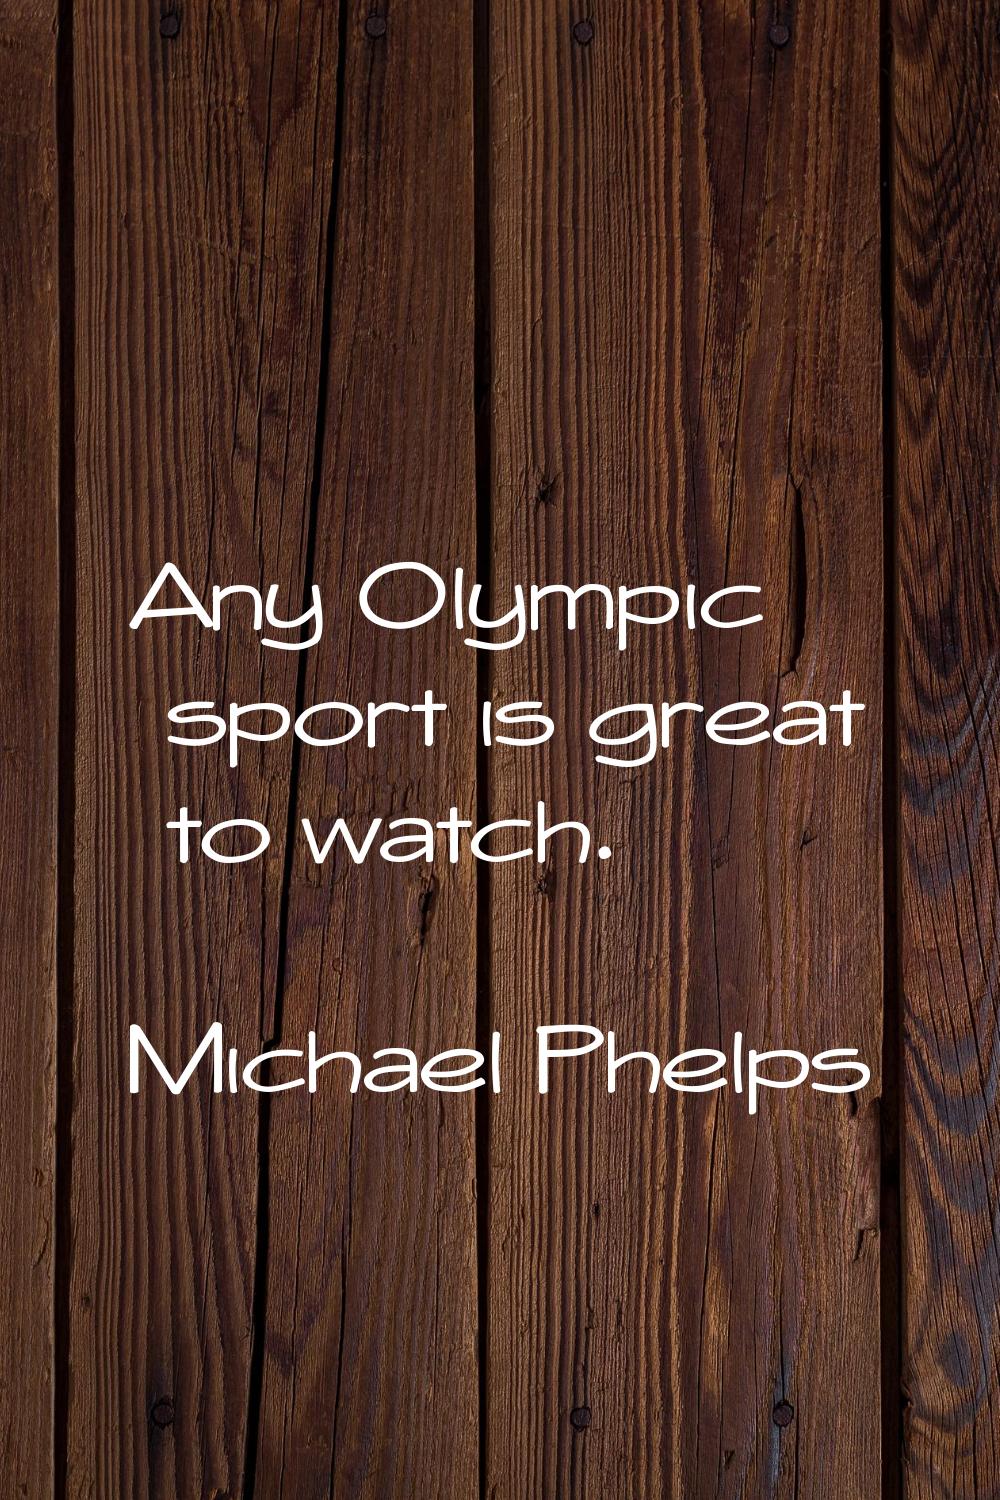 Any Olympic sport is great to watch.